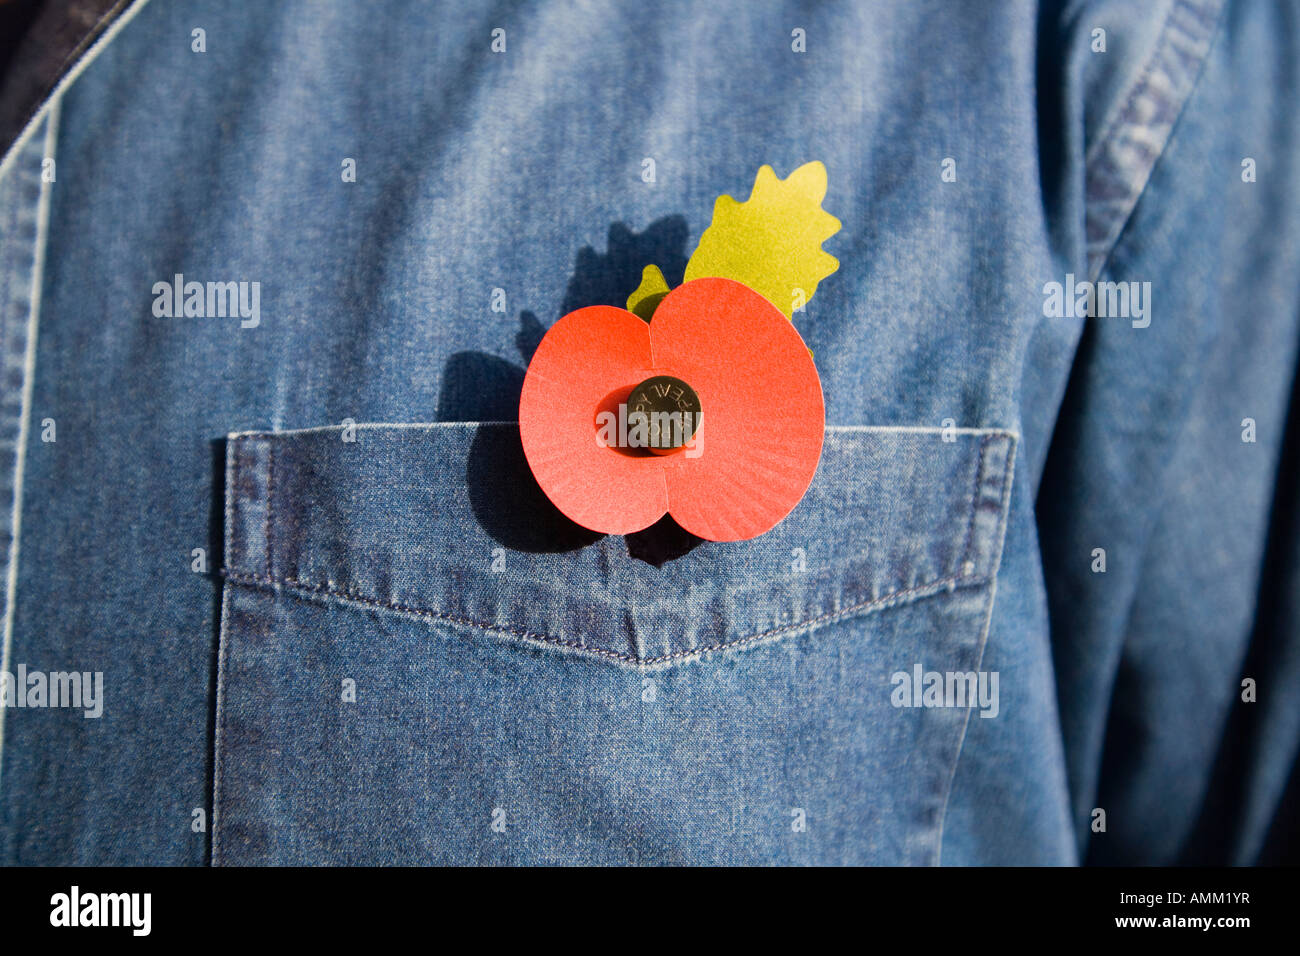 Man wearing a Remembrance day poppy on a blue shirt. UK. Stock Photo